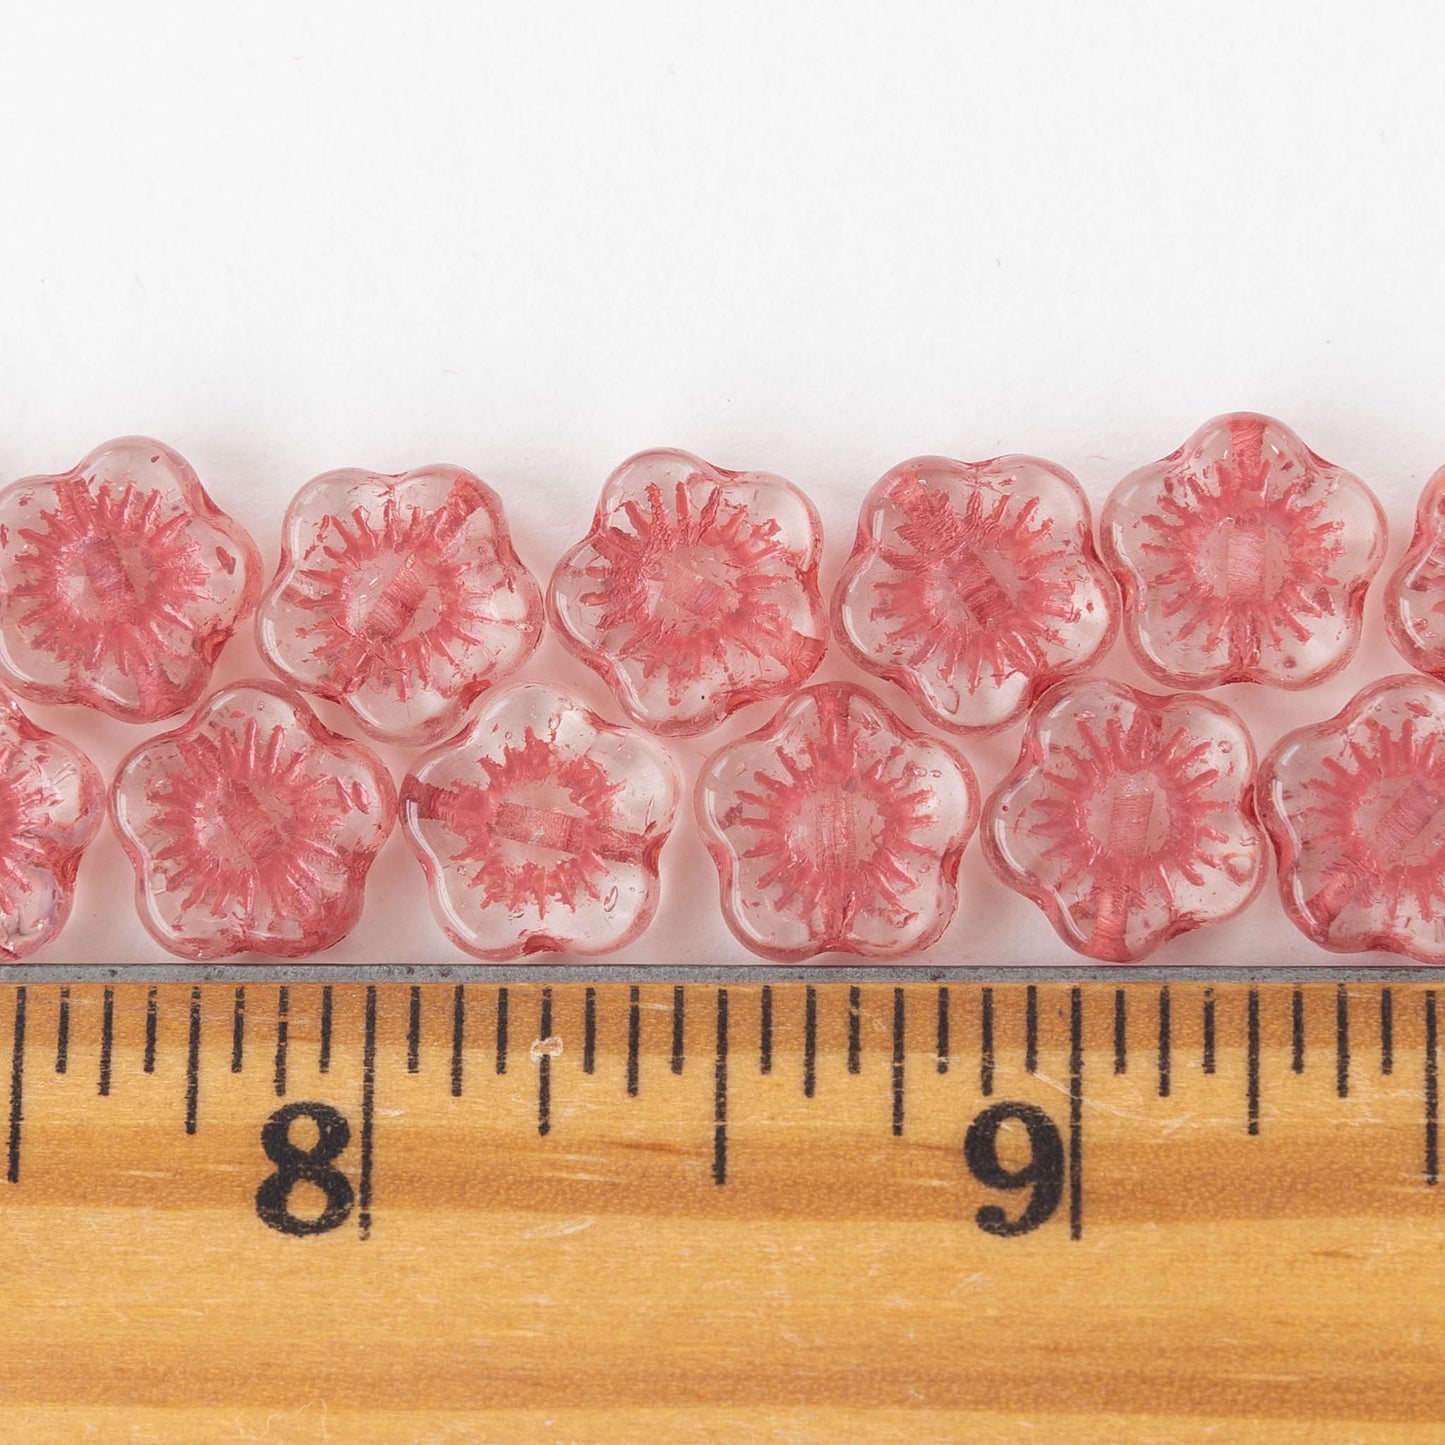 10mm Glass Flower Beads - Crystal with Pink Wash - 20 beads